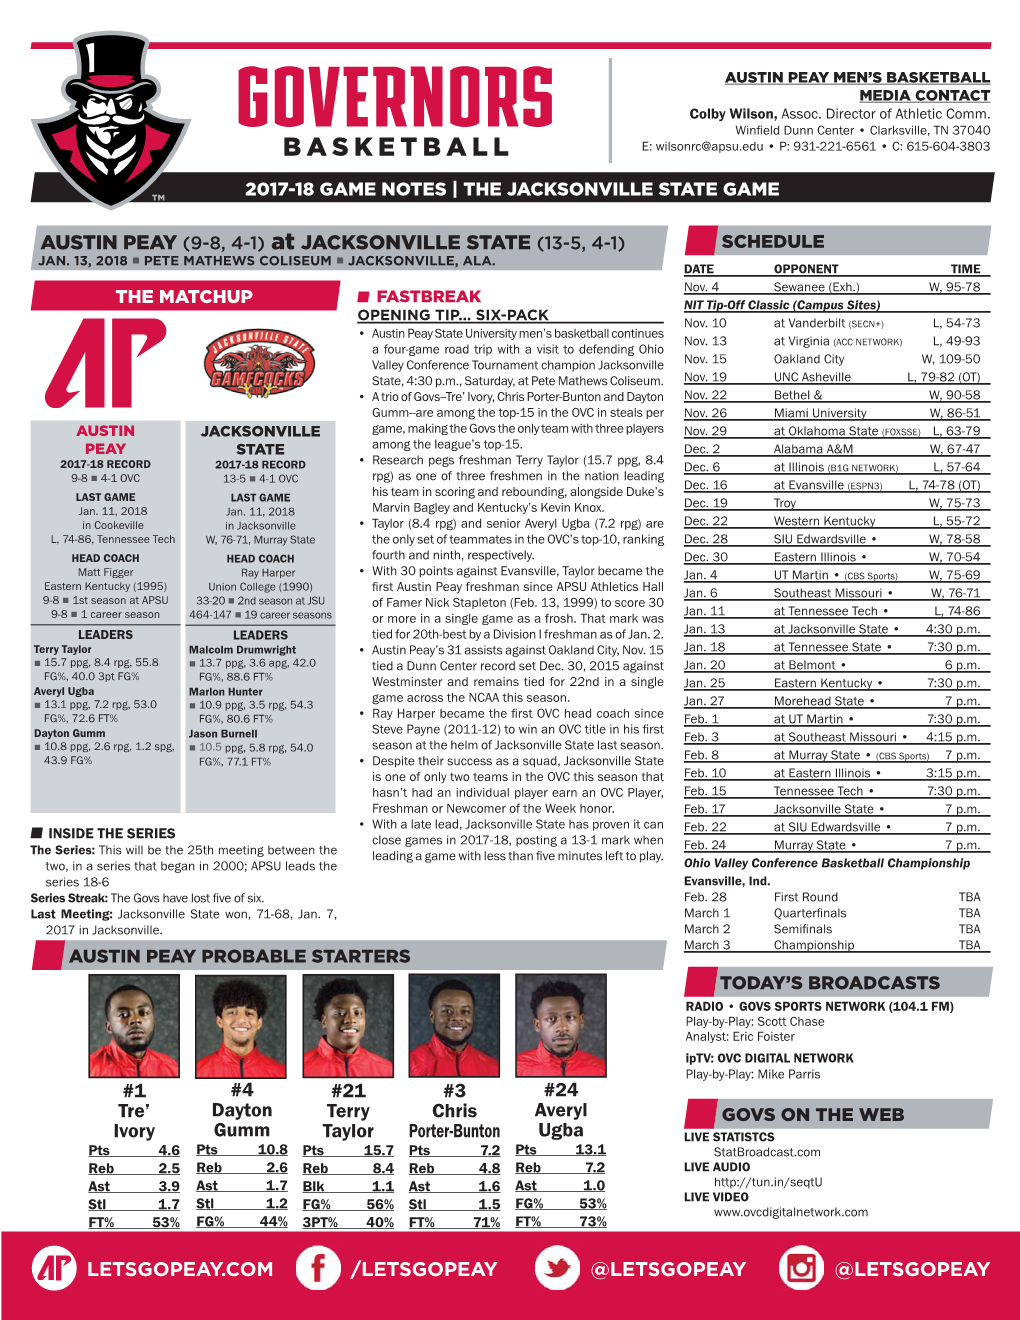 AUSTIN PEAY (9-8, 4-1) at JACKSONVILLE STATE (13-5, 4-1) SCHEDULE JAN